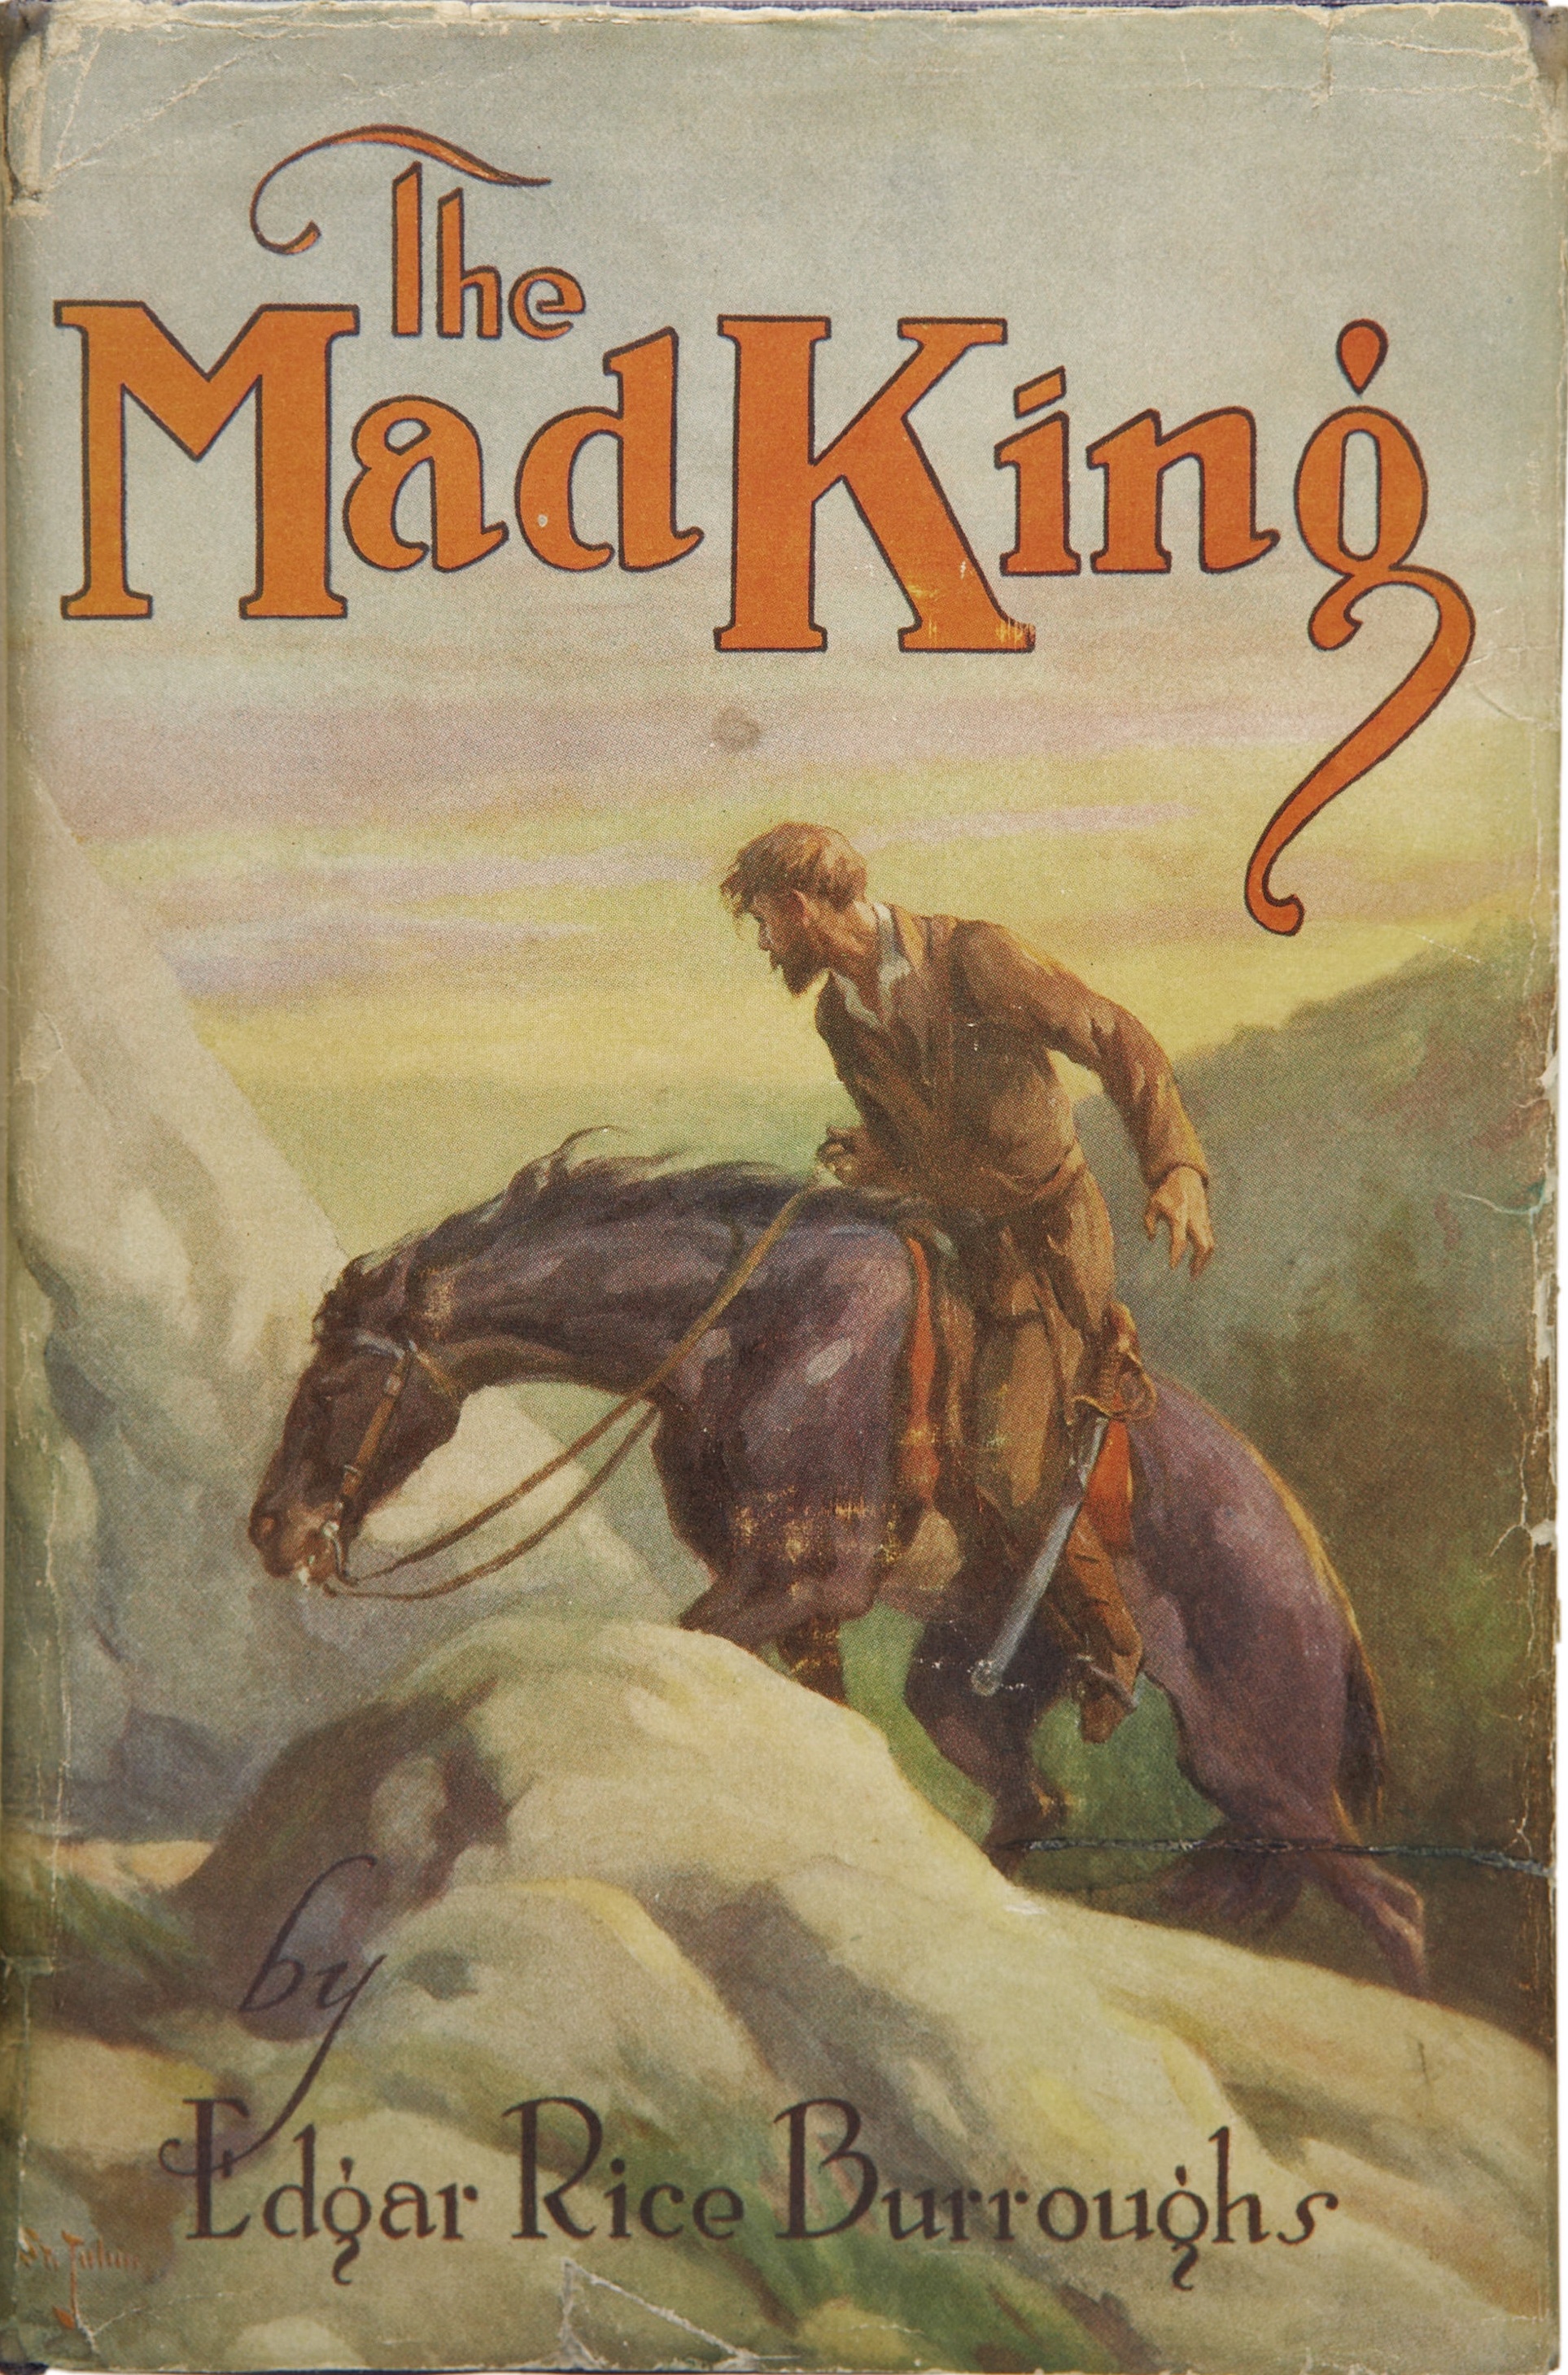 Edgar Rice Burroughs. The Mad King. Chicago A. C. McClurg & Co., 1926